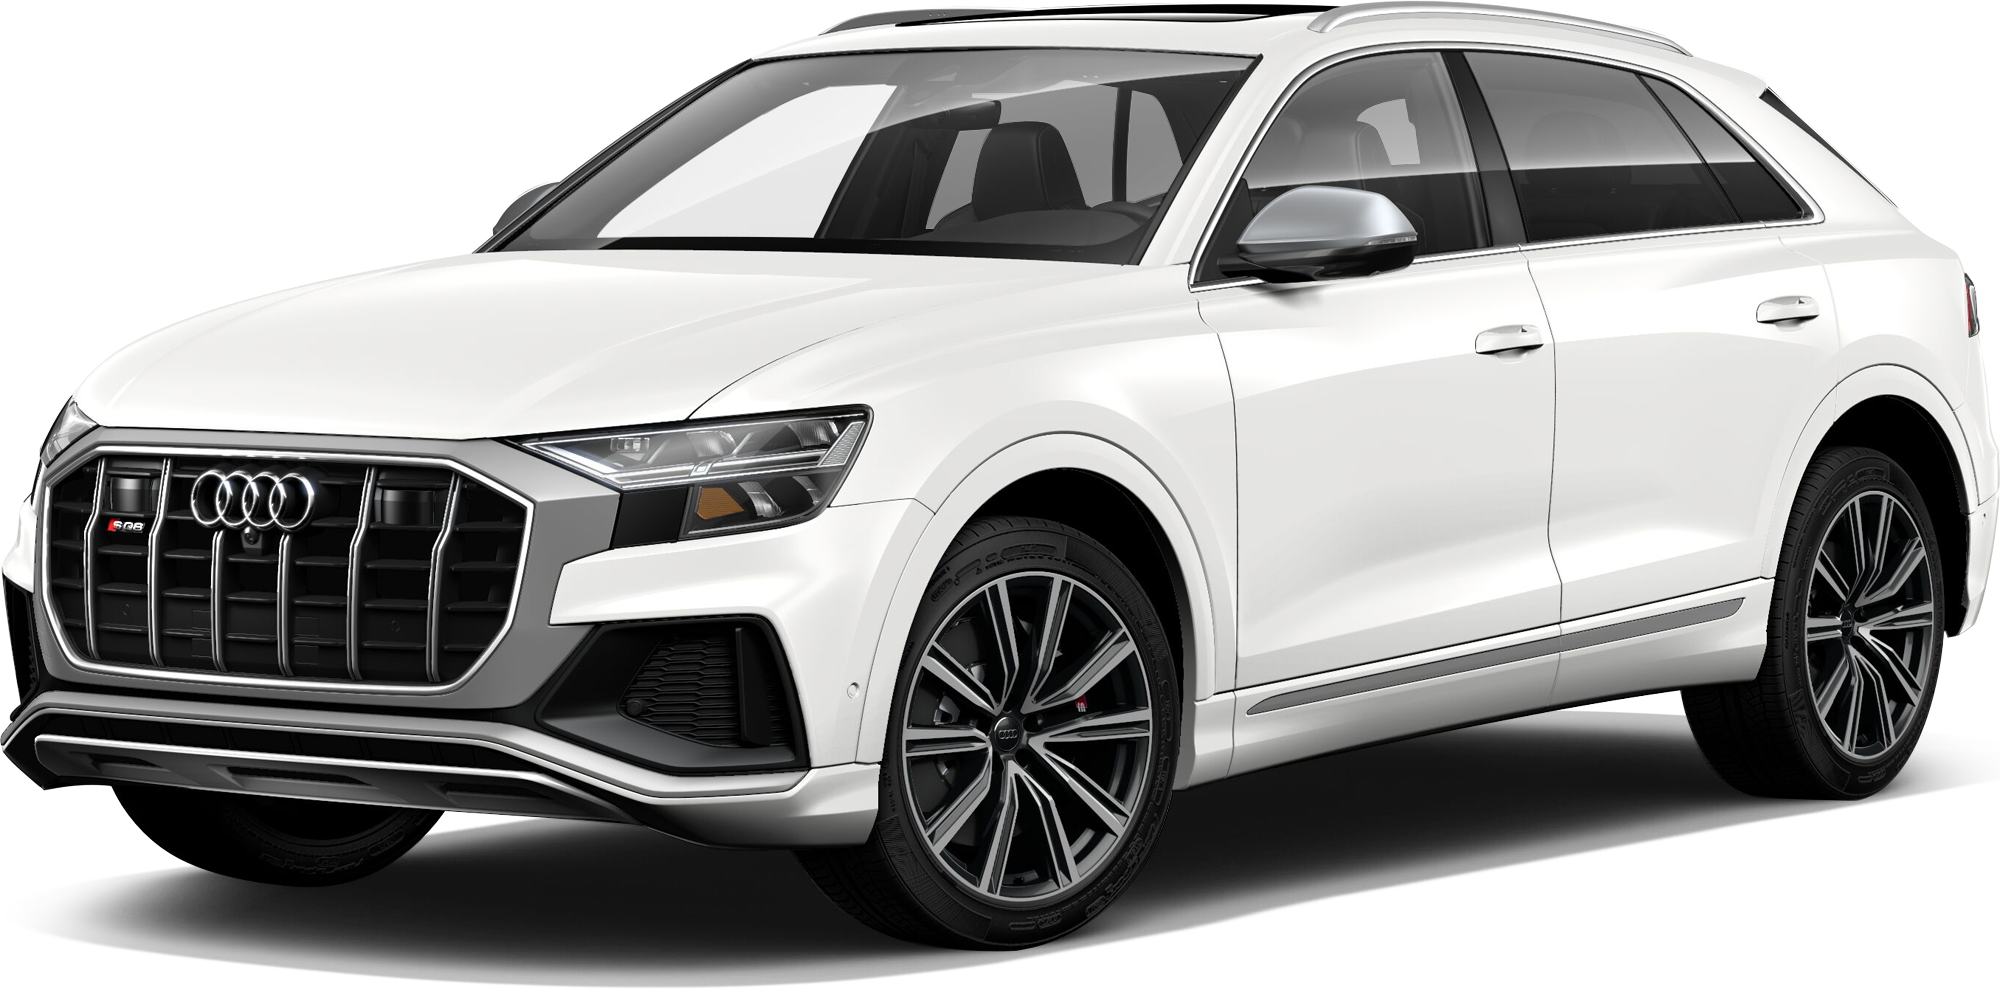 2020 Audi SQ8 Incentives, Specials & Offers in Maplewood NJ